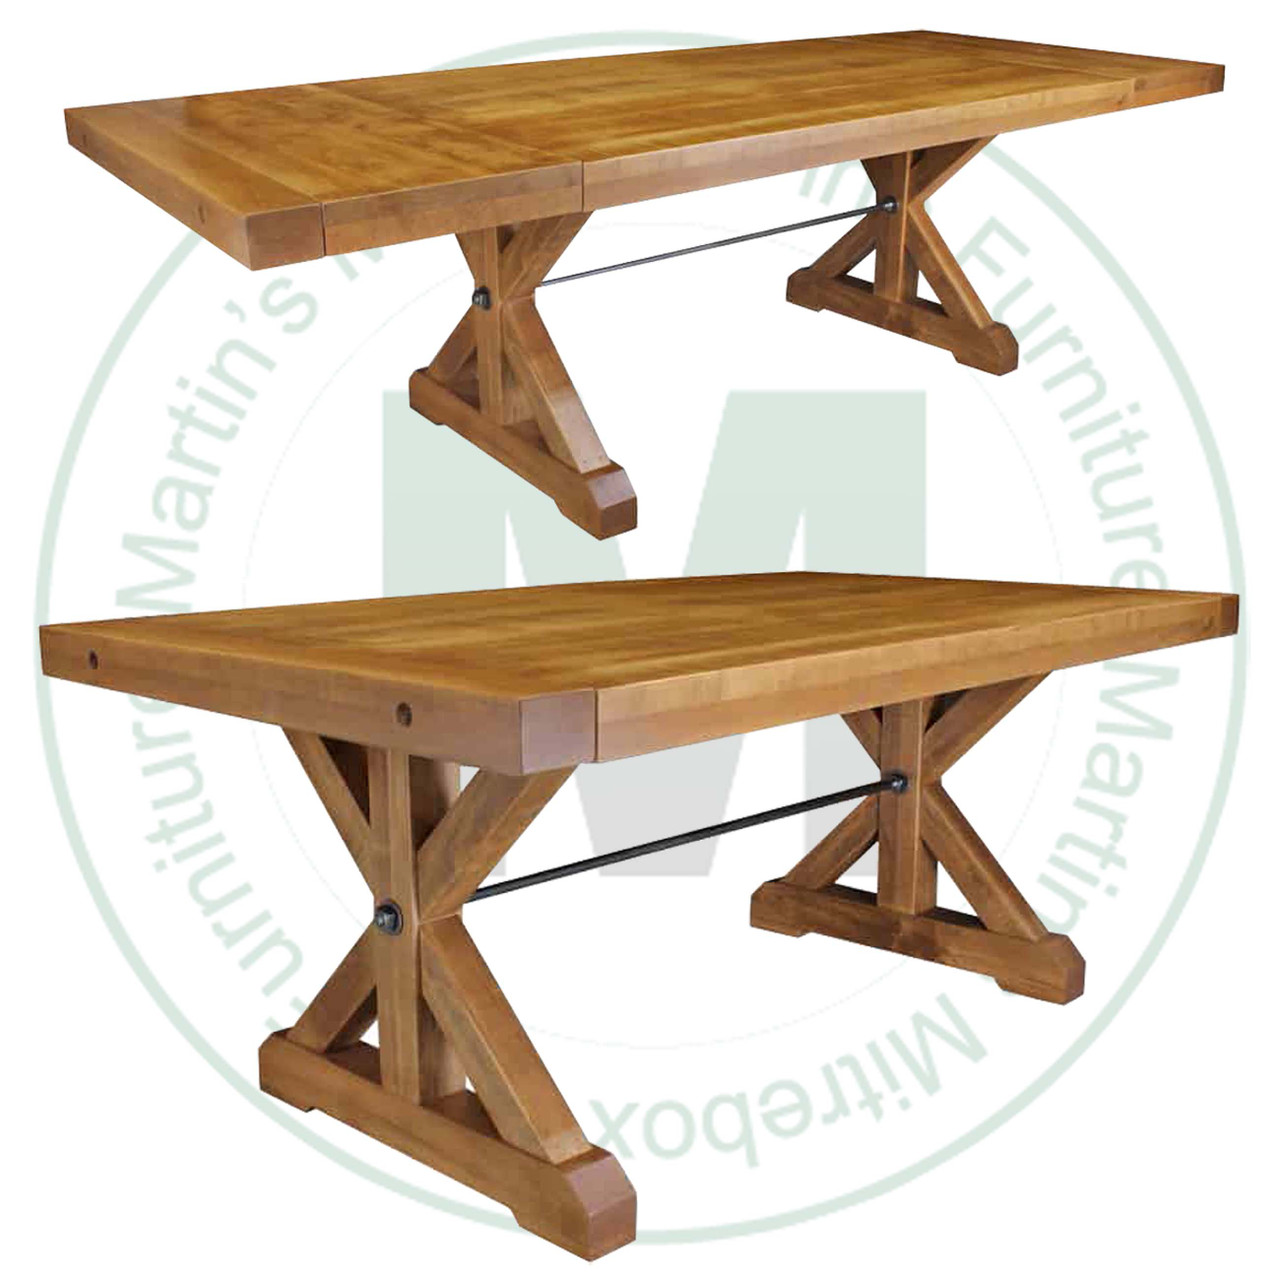 Wormy Maple Klondike Trestle Solid Top Table 36'' Deep x 72'' Wide x 30'' High With 2 - 16'' Leaves